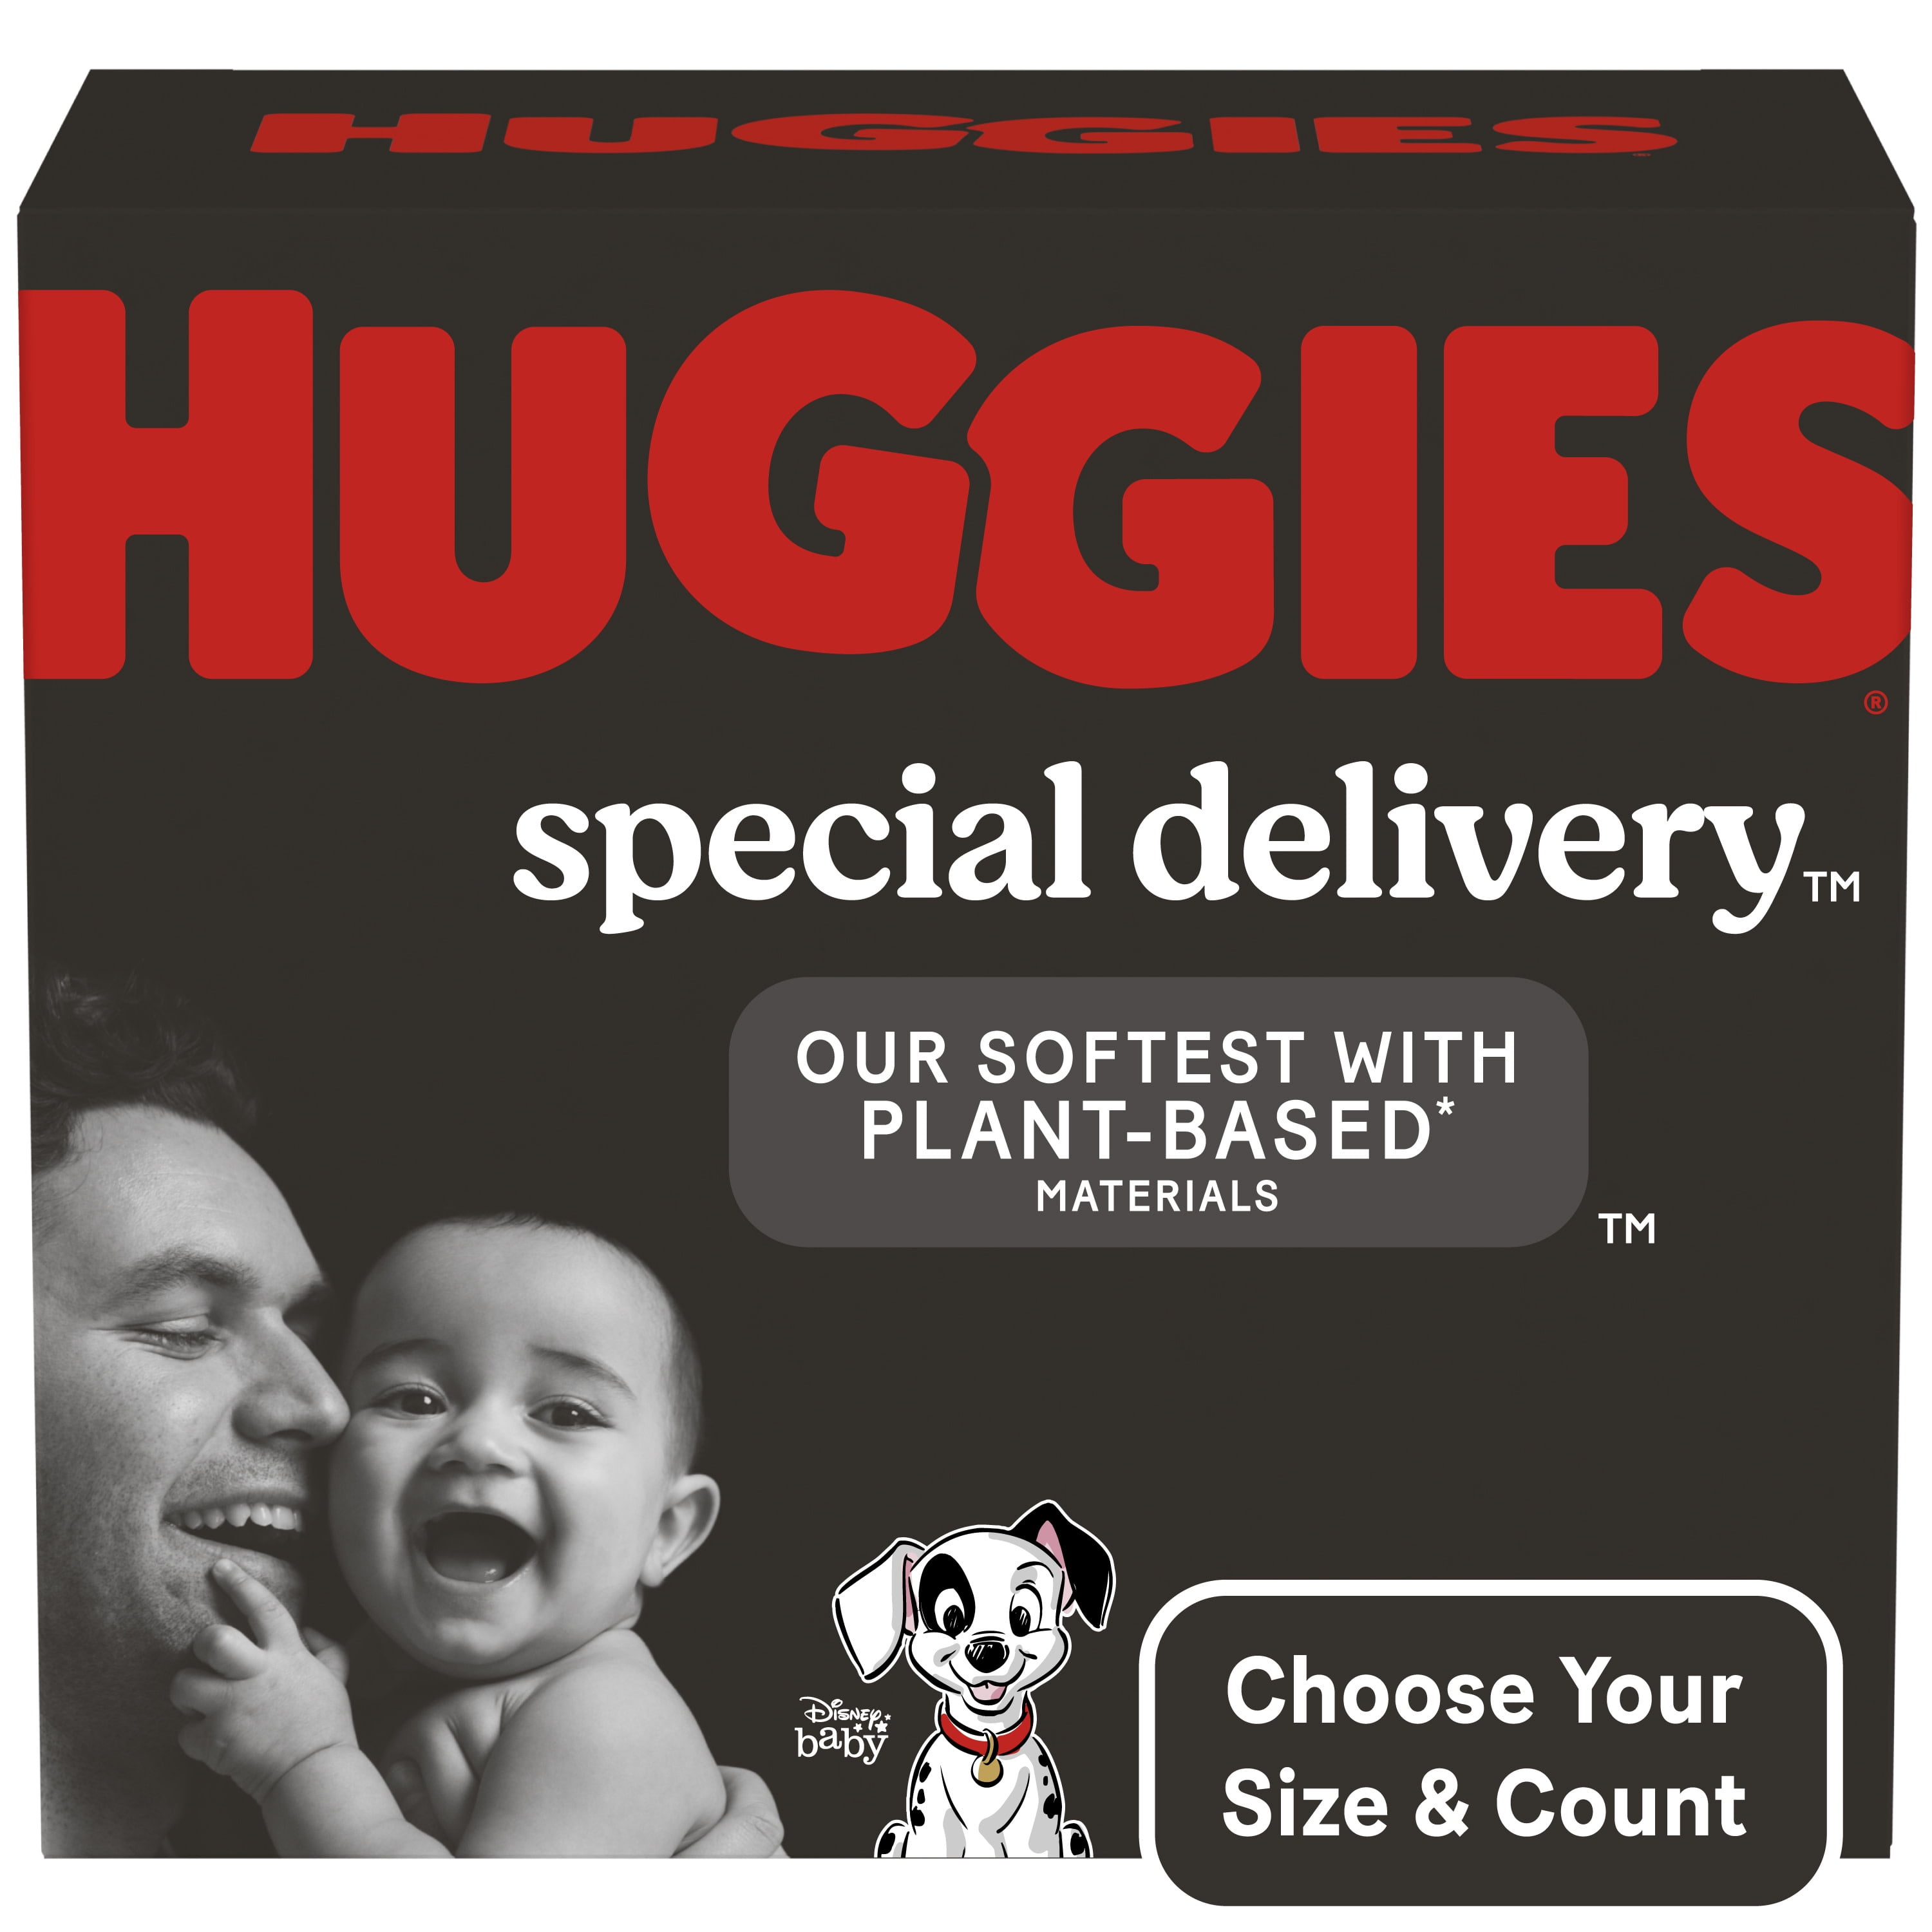 Huggies Special Delivery Diapers, Size 4, 52 Ct (Select for More Options)